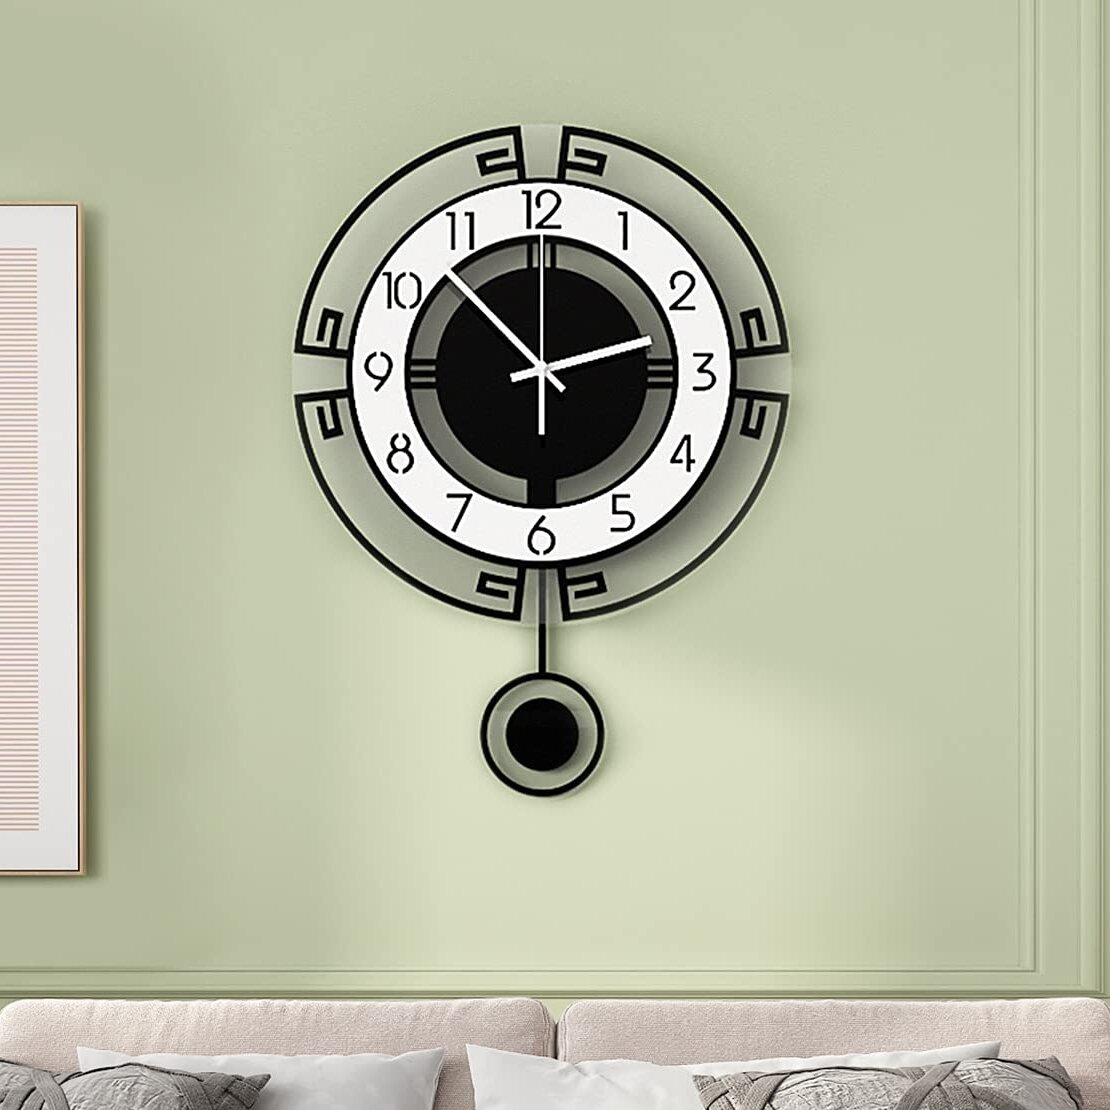 Wall Clock Vintage Airplane Engine Silent Non-Ticking Round Clock Acrylic Modern Art Wall Decorative for Bedroom Living Room Home Office 